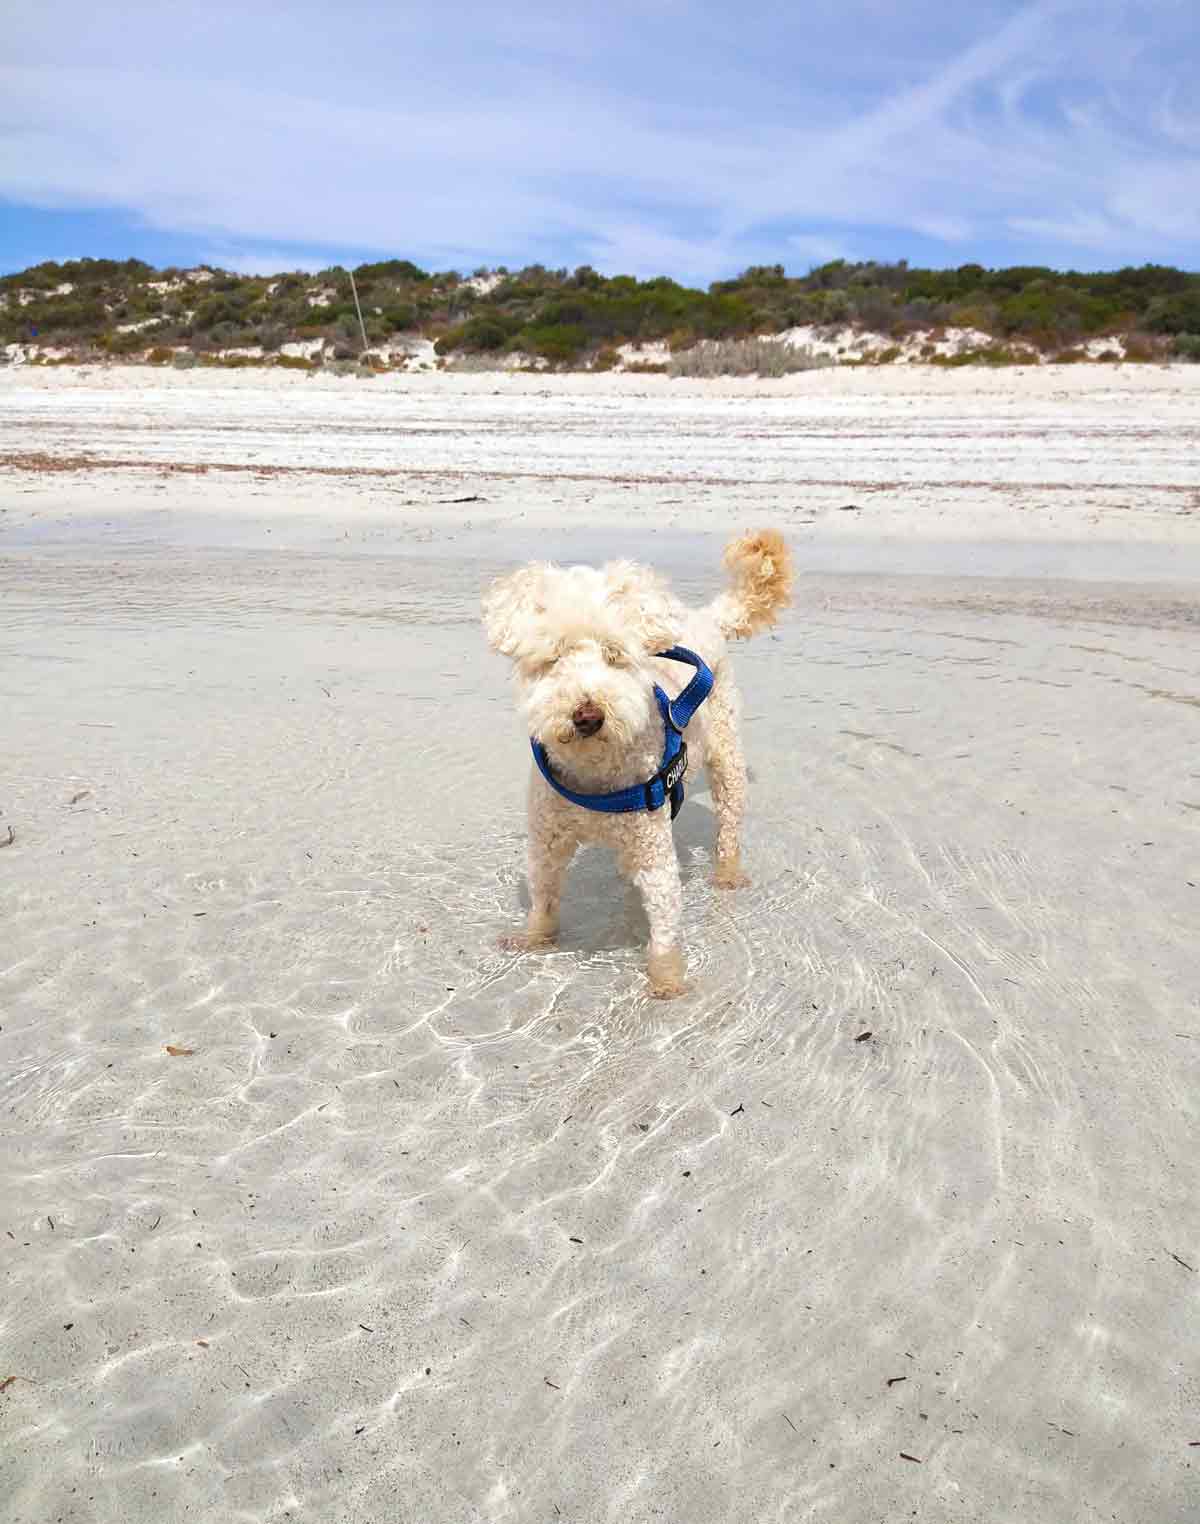 Charlie in shallow water at the town beach. Located in Elliston, Eyre Peninsula, South Australia.